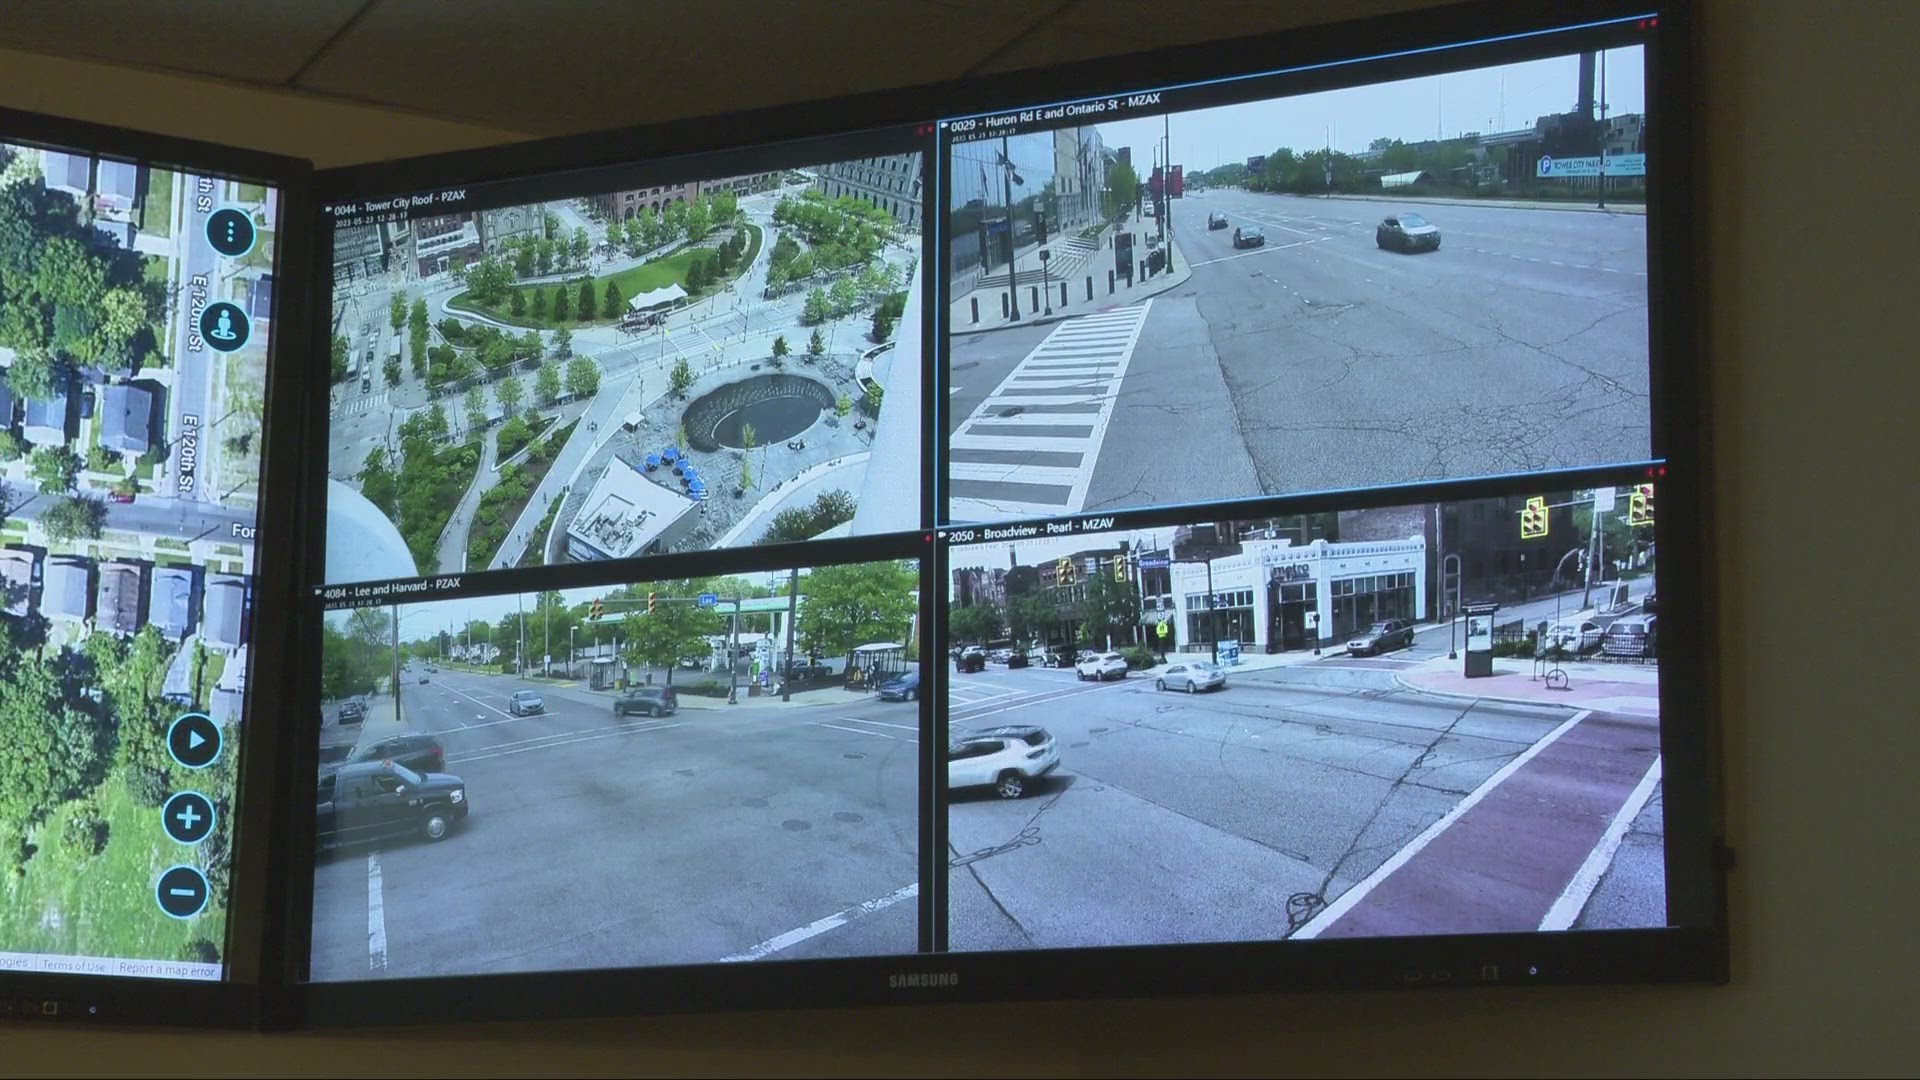 It's called the Safe Smart Program.  A camera system that law enforcement can monitor in real-time.  Lindsay Buckingham has more on this initiative.